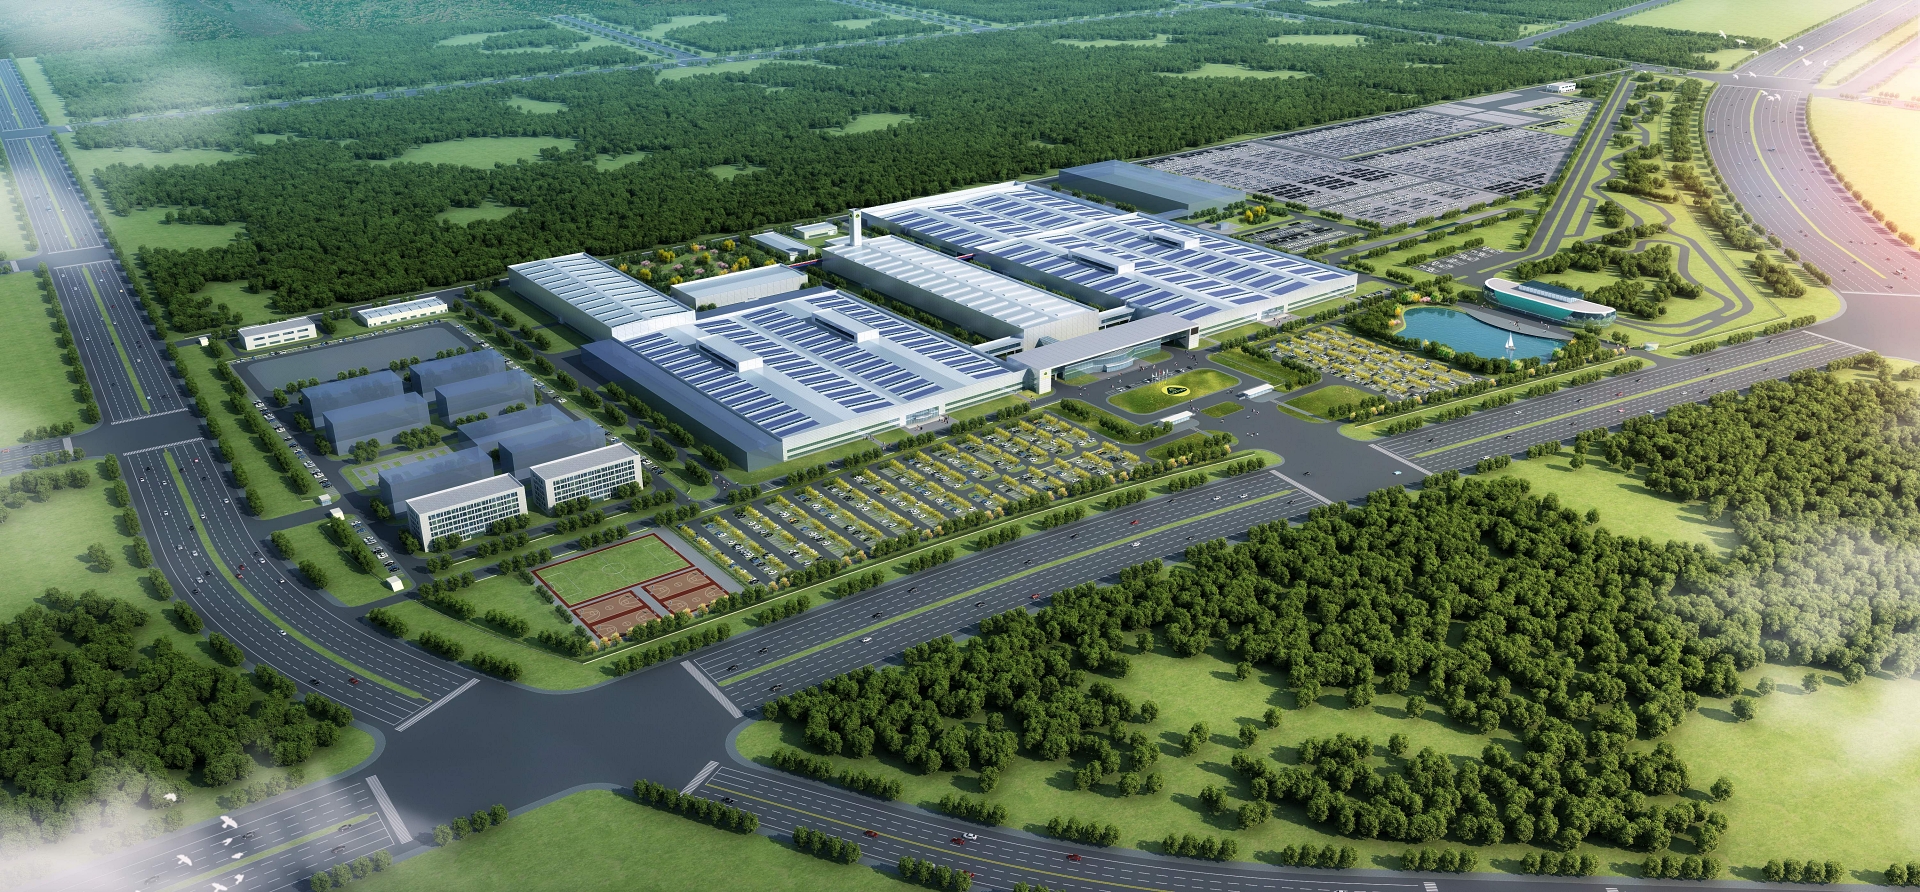 Lotus-Technology-manufacturing-facility-architectural-image